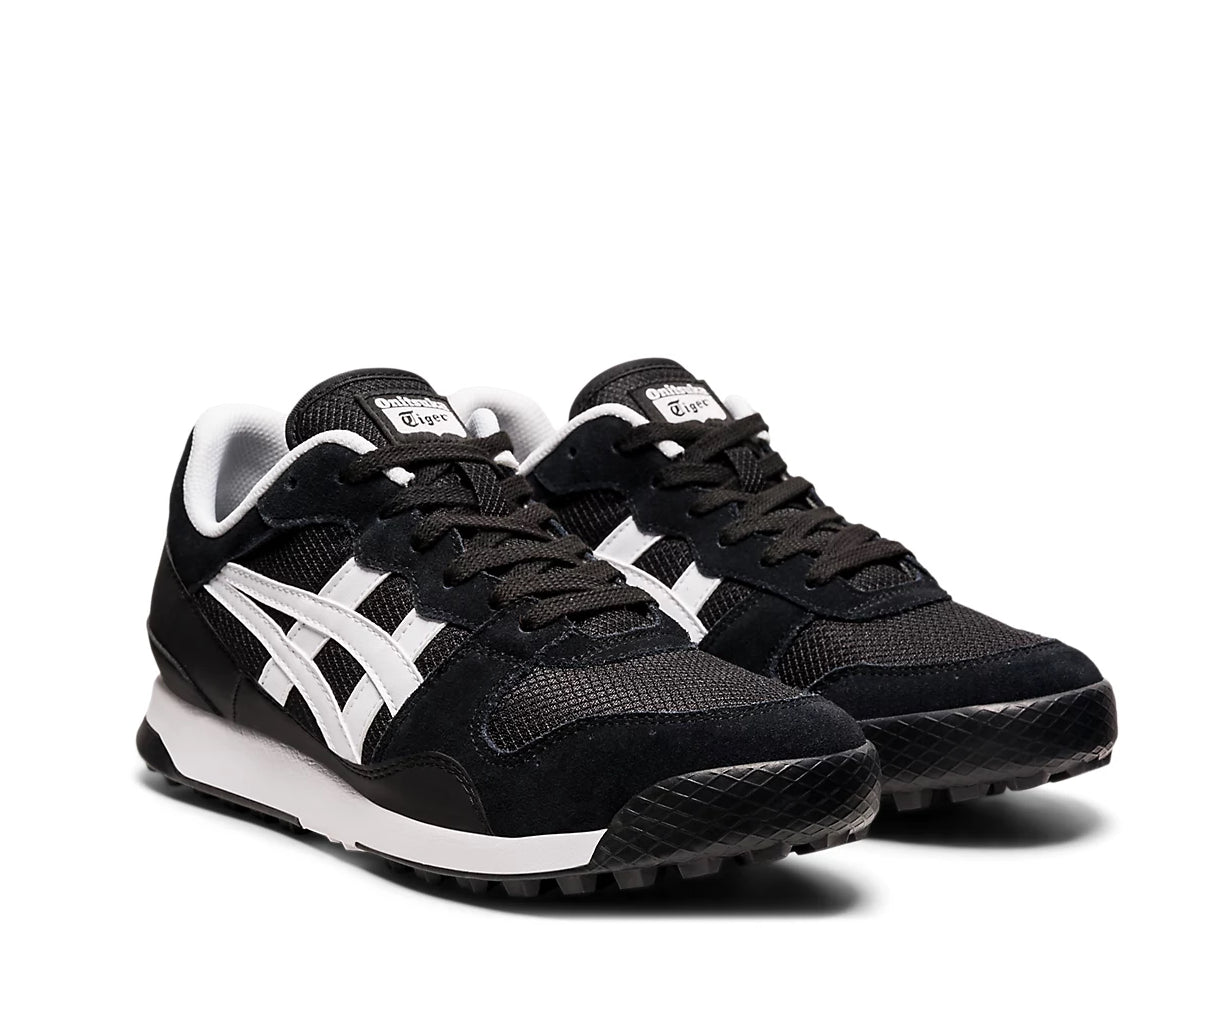 A black mesh and suede Onitsuka Tiger sneaker with white accents.